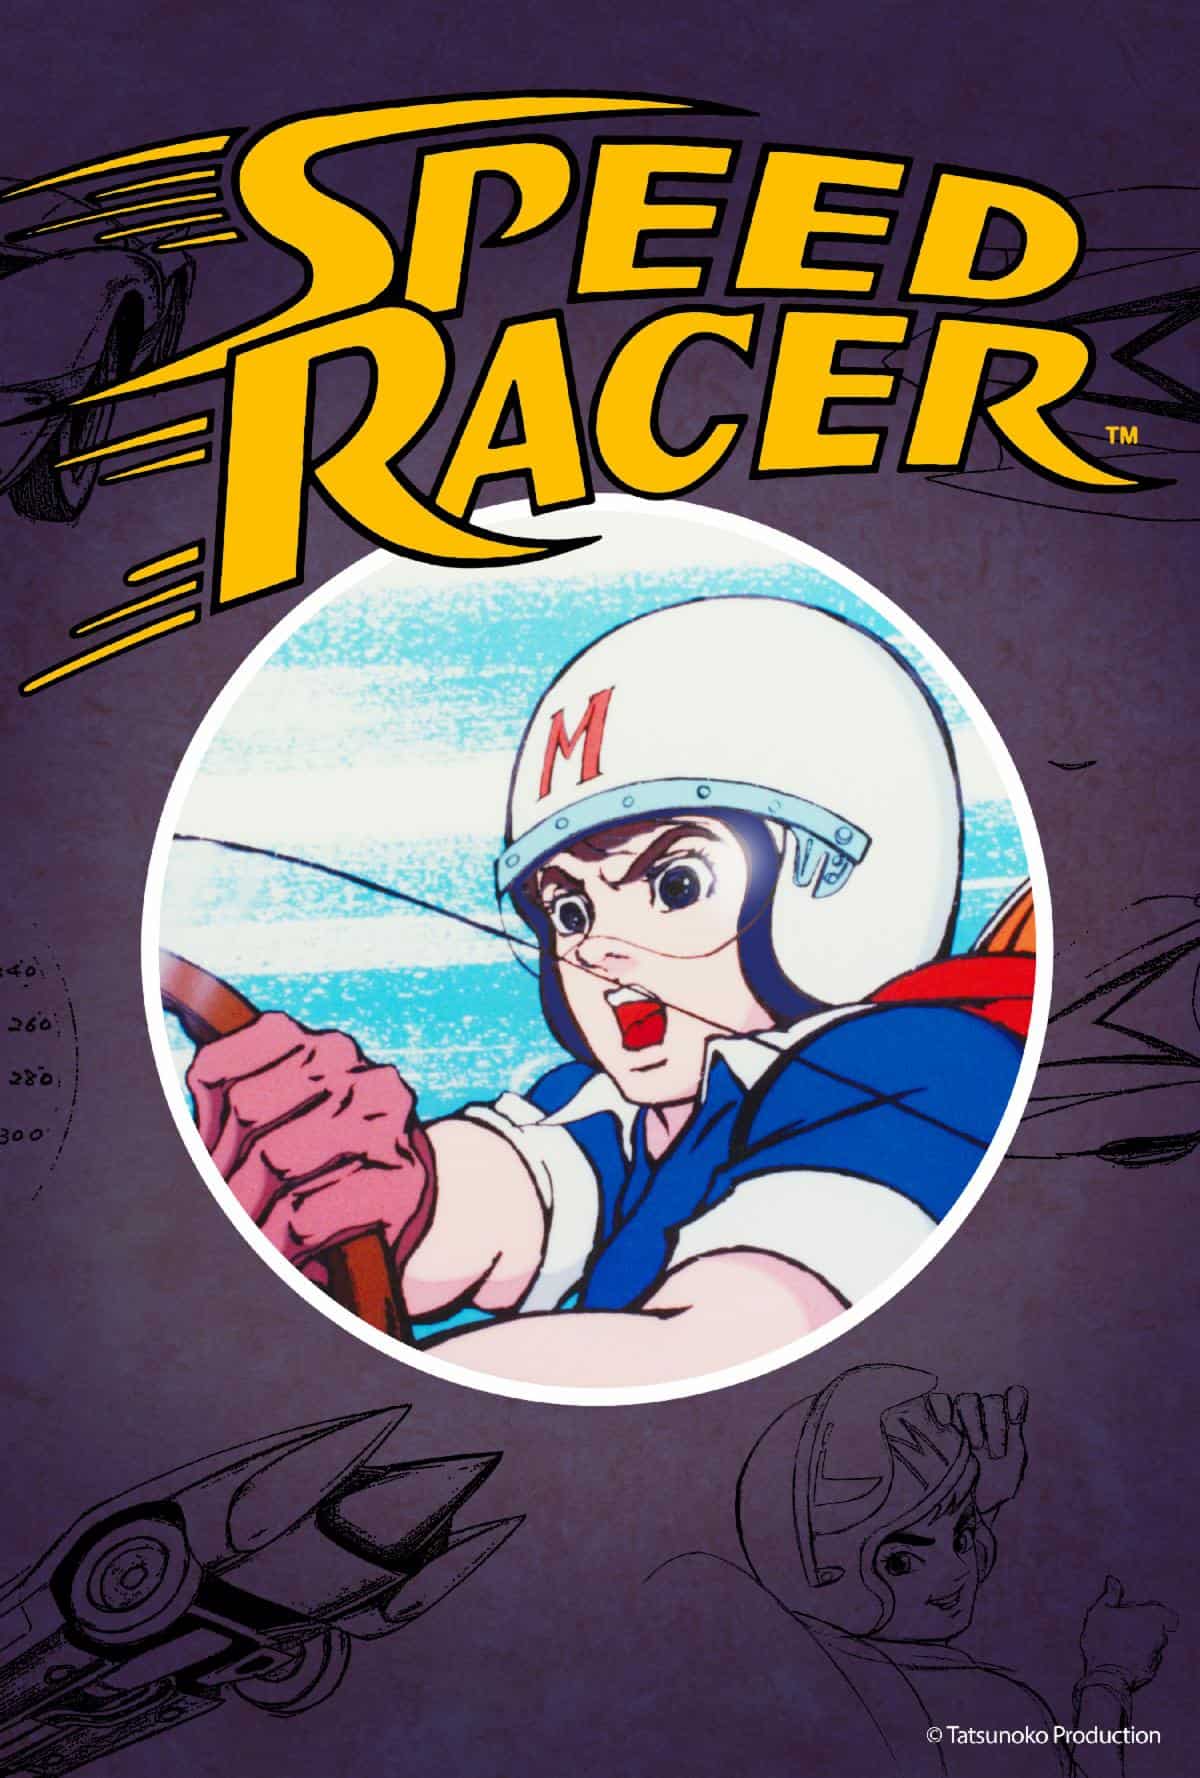 Speed Racer races onto Digital Platforms with All 52 Episodes 3